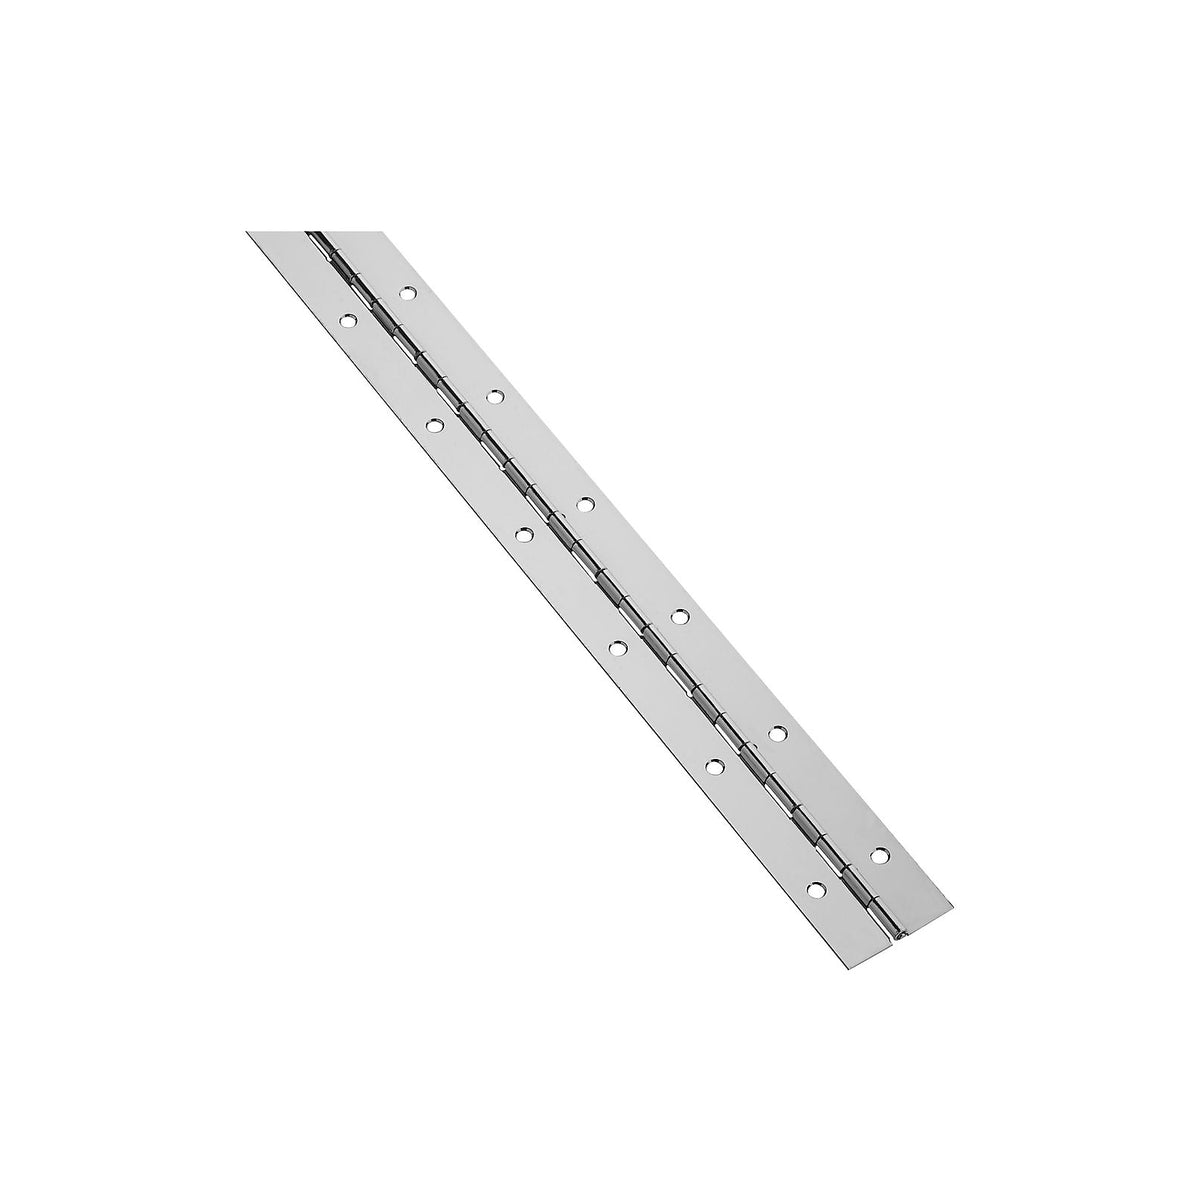 Stanley N266-965 Continuous Hinge, Stainless Steel, 1-1/2" x 72"